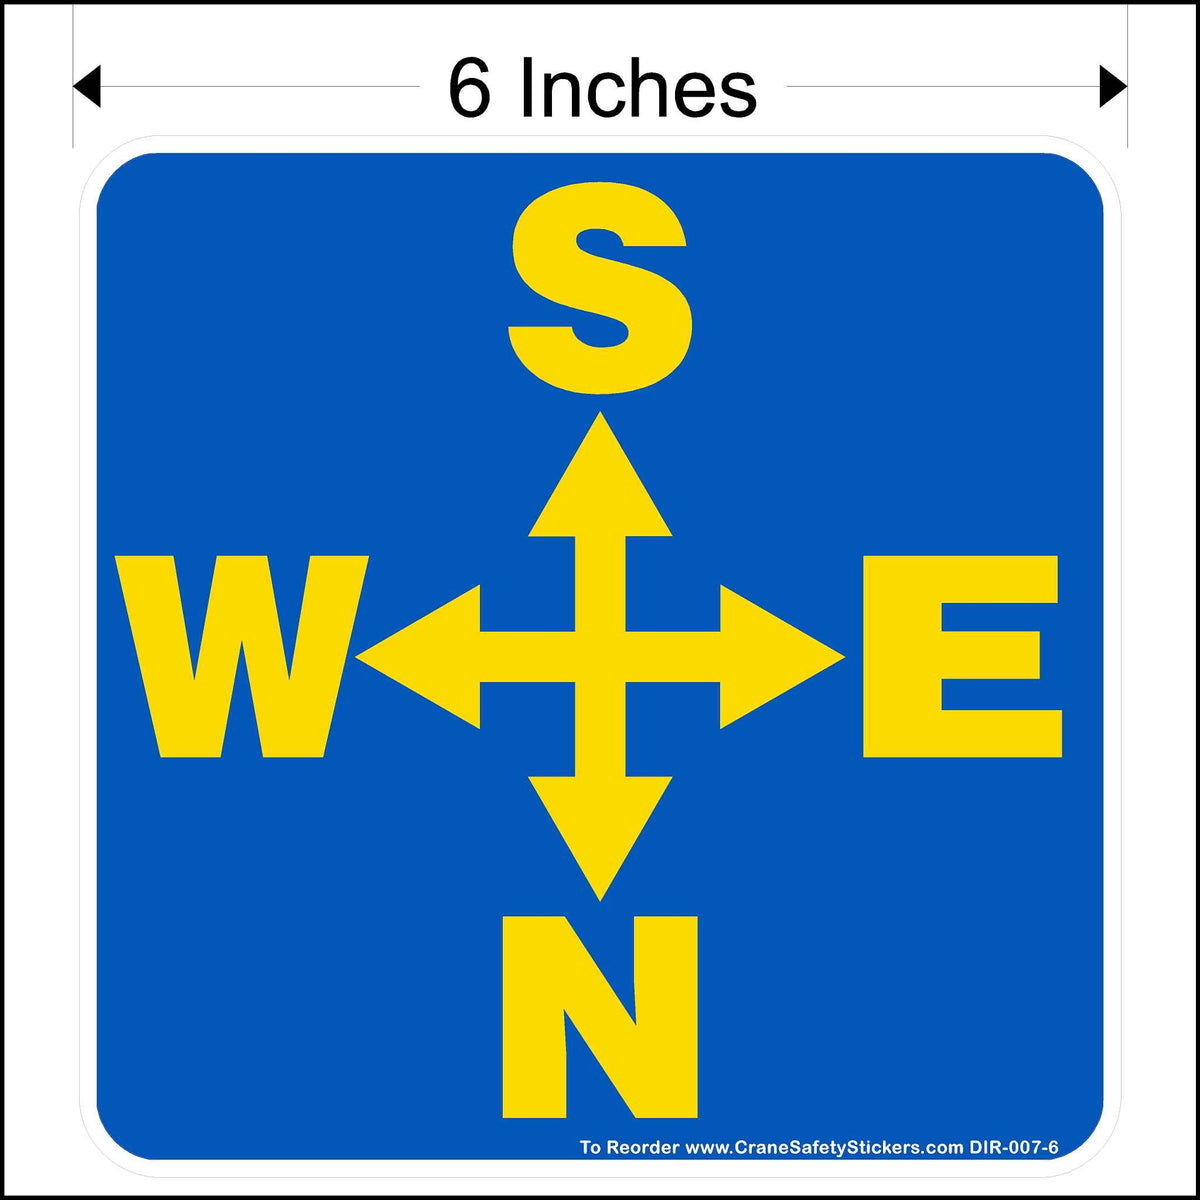 Six inch overhead crane decal printed with yellow south, notrth, east, and west arrows on a blue background.